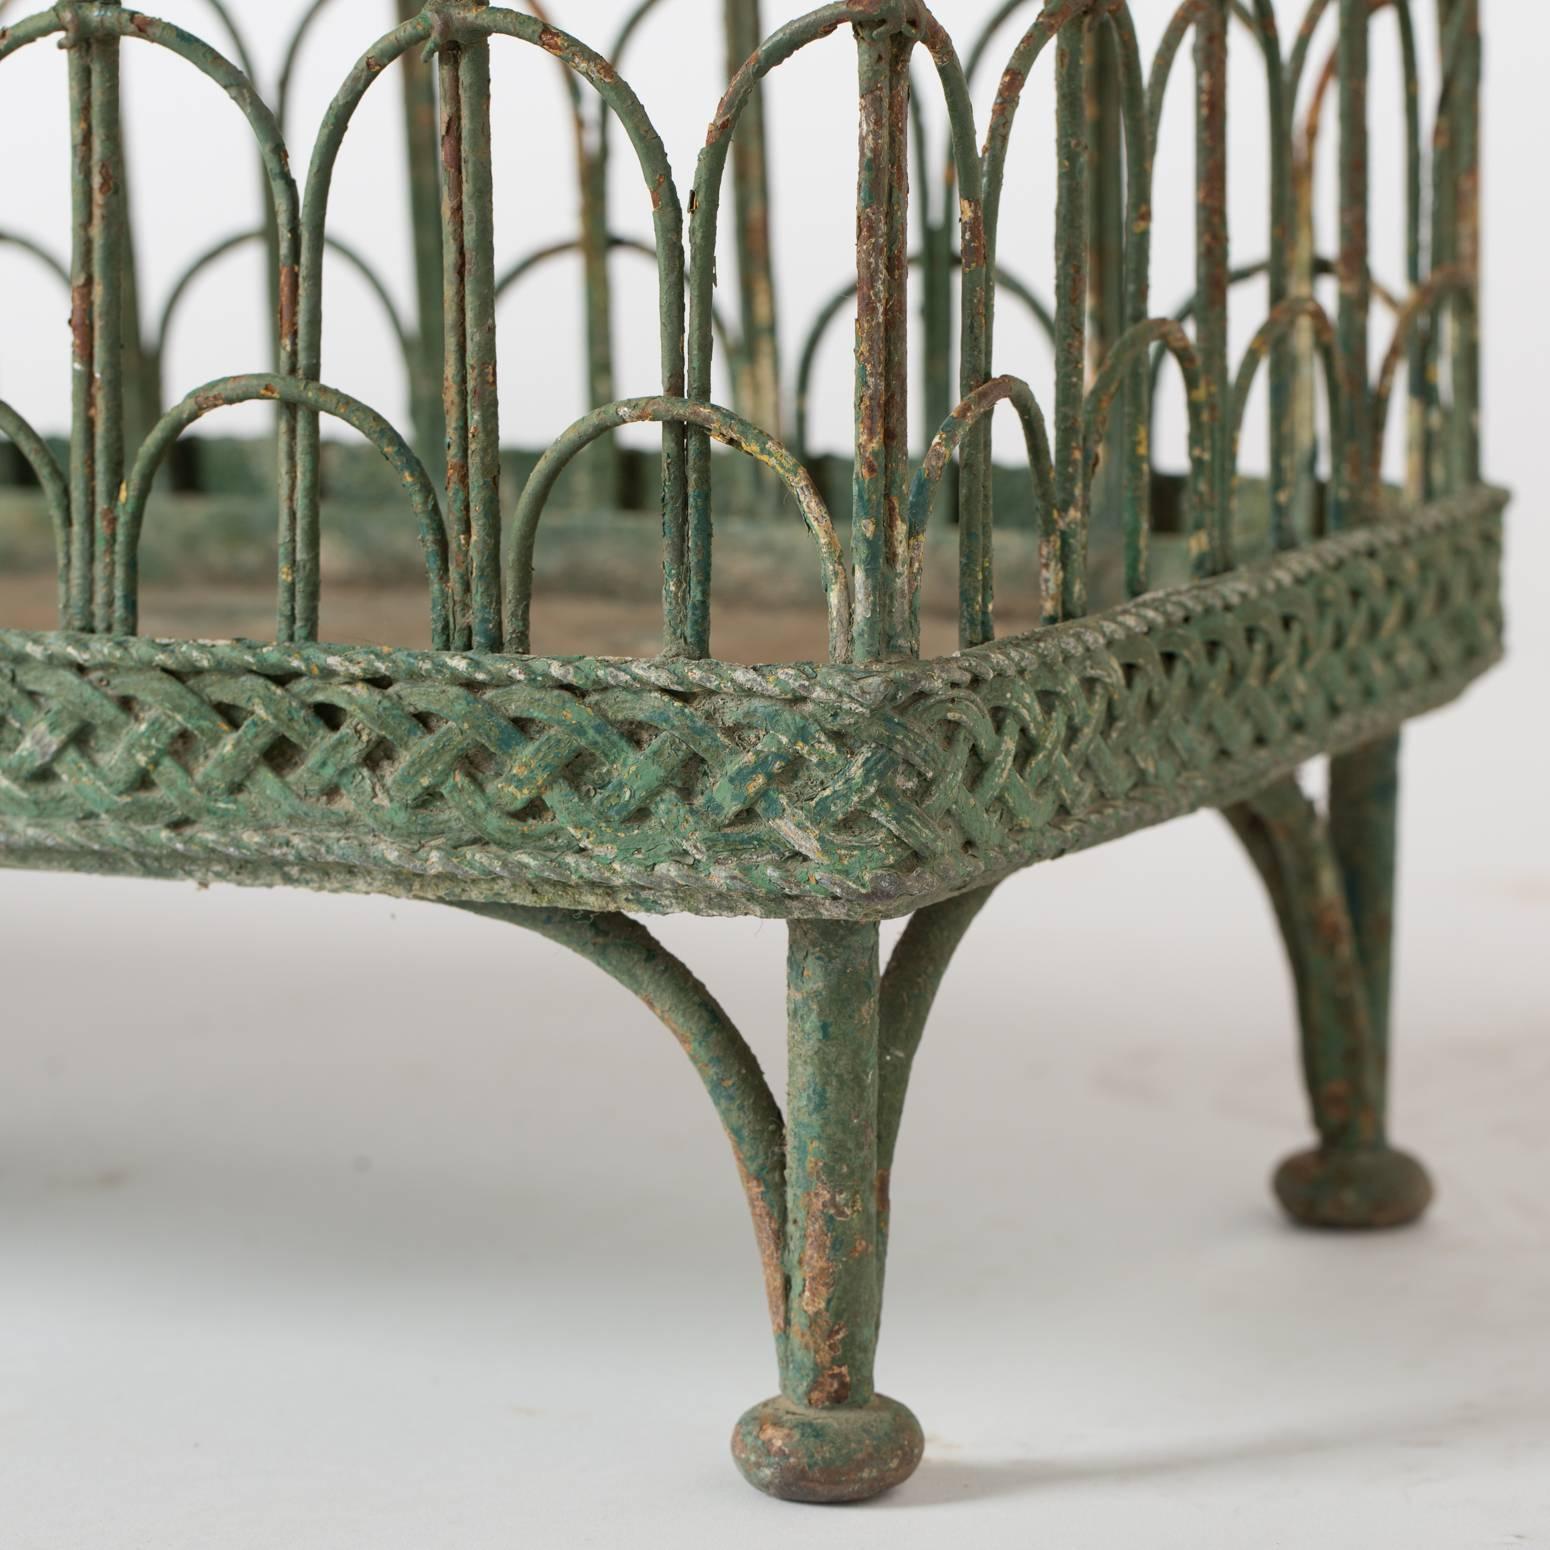 These freestanding jardinieres date to the mid-19th century and retain just the right traces of the original green paint. The wirework is in perfect conditions as are the liners. They stand on elegant pad feet and are a great pair to add charm and